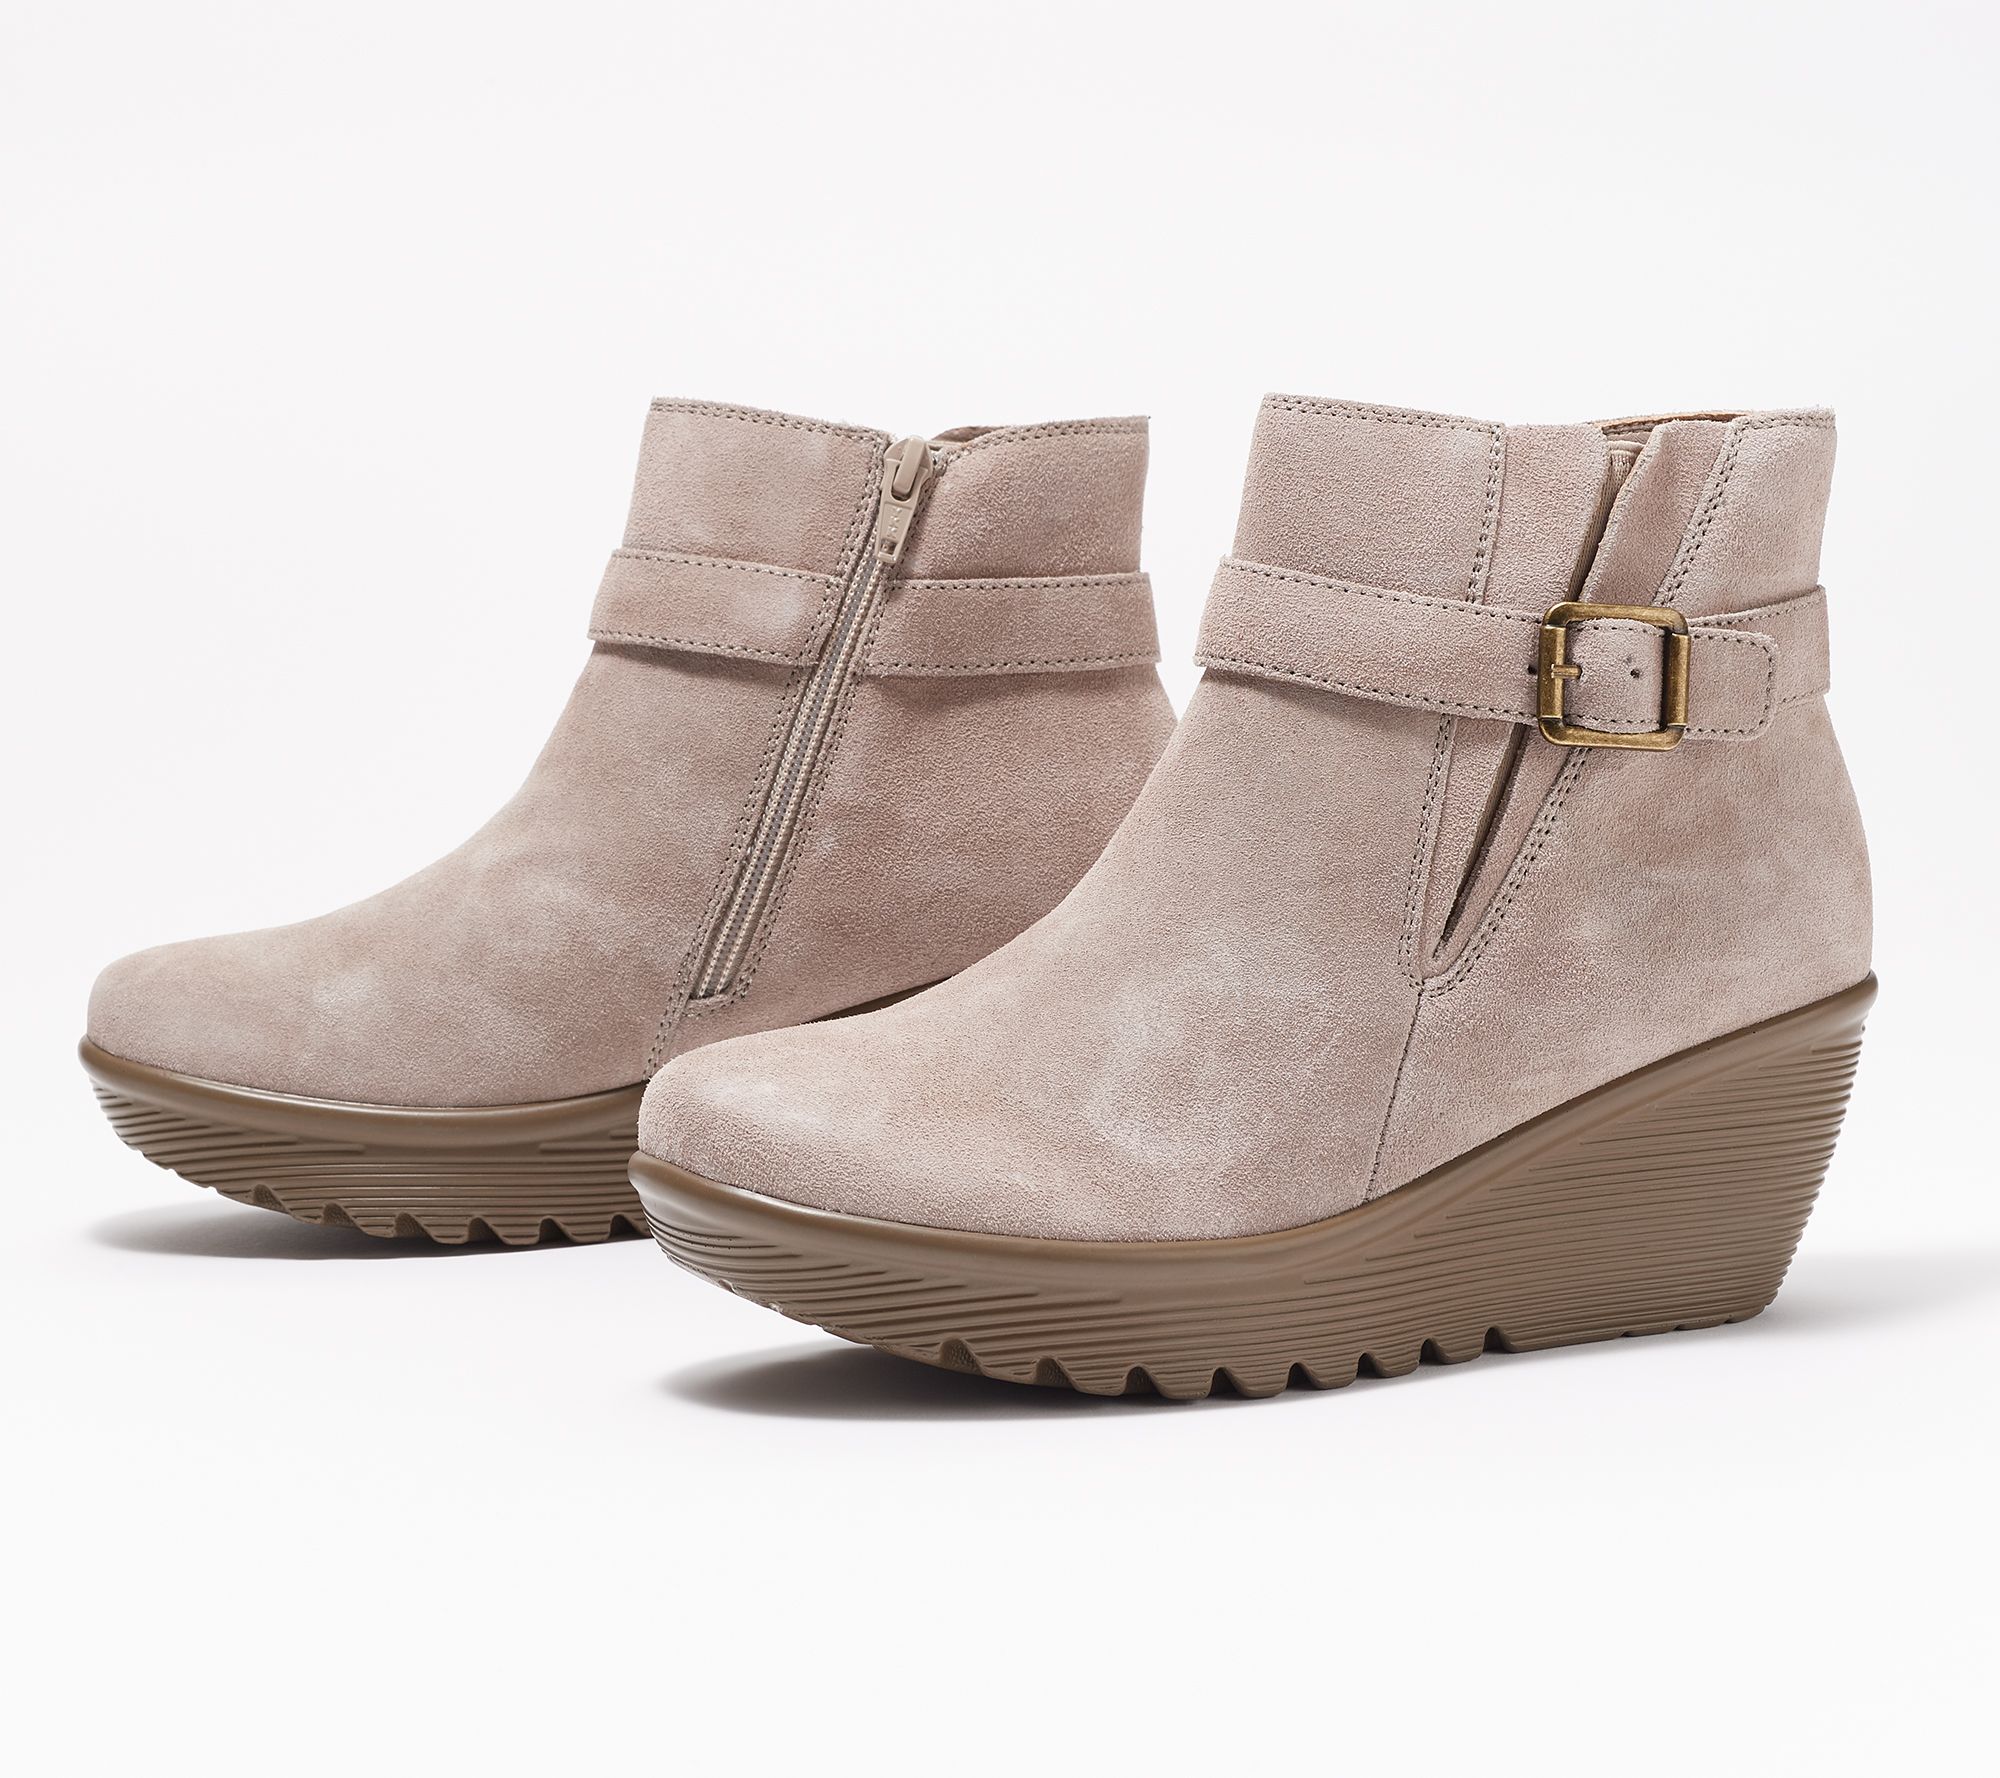 As Is"Skechers Suede Parallel Wedge Ankle Boots - Date - QVC.com